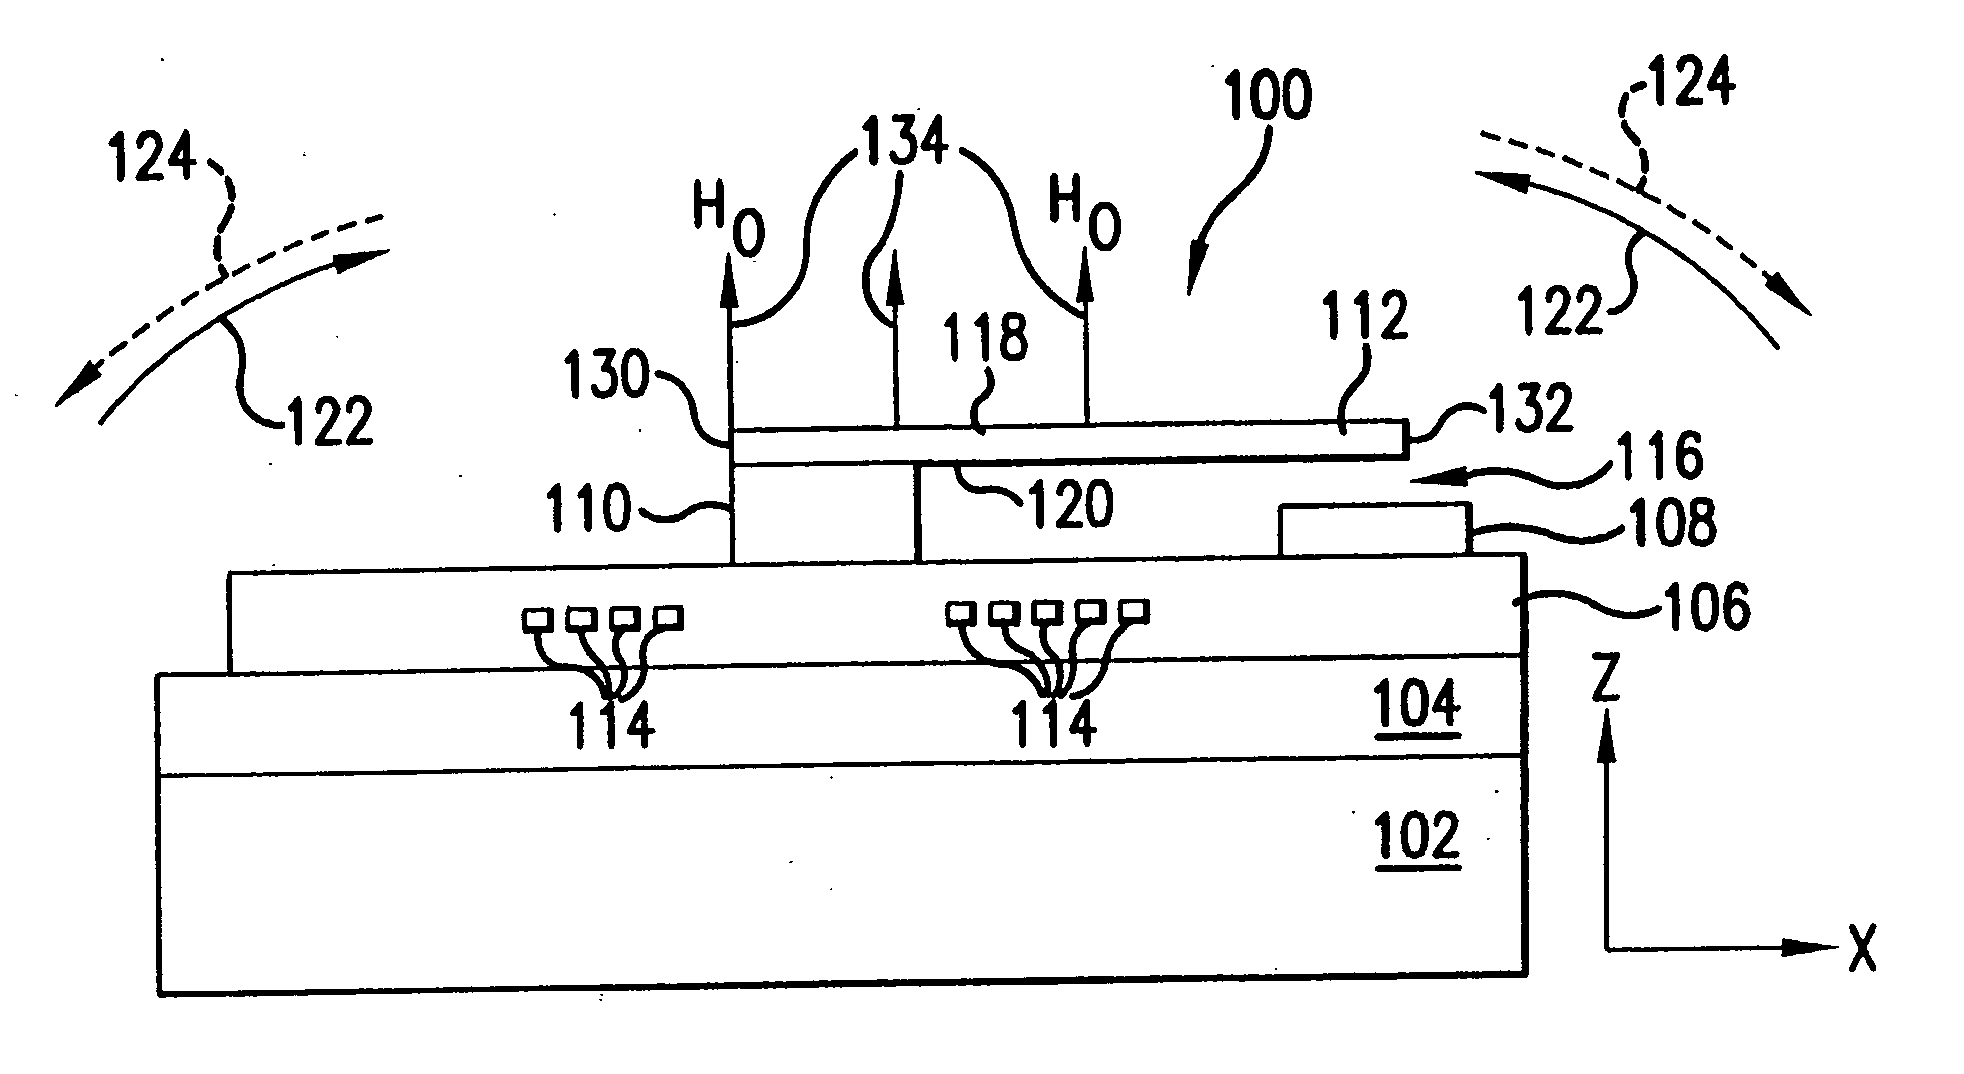 Apparatus utilizing latching micromagnetic switches